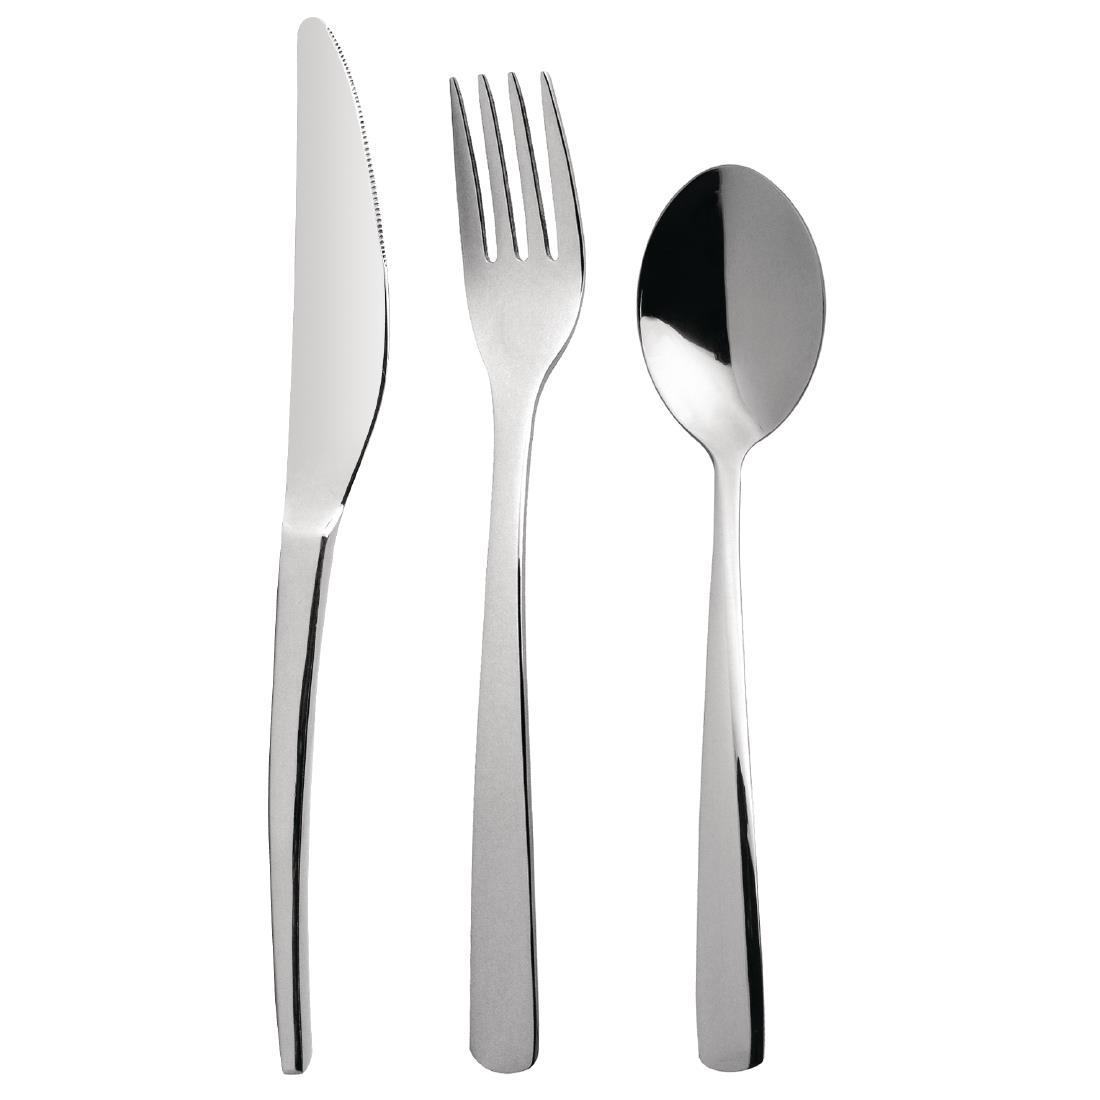 Olympia Tira Cutlery Sample Set (Pack of 3) - S621  - 1